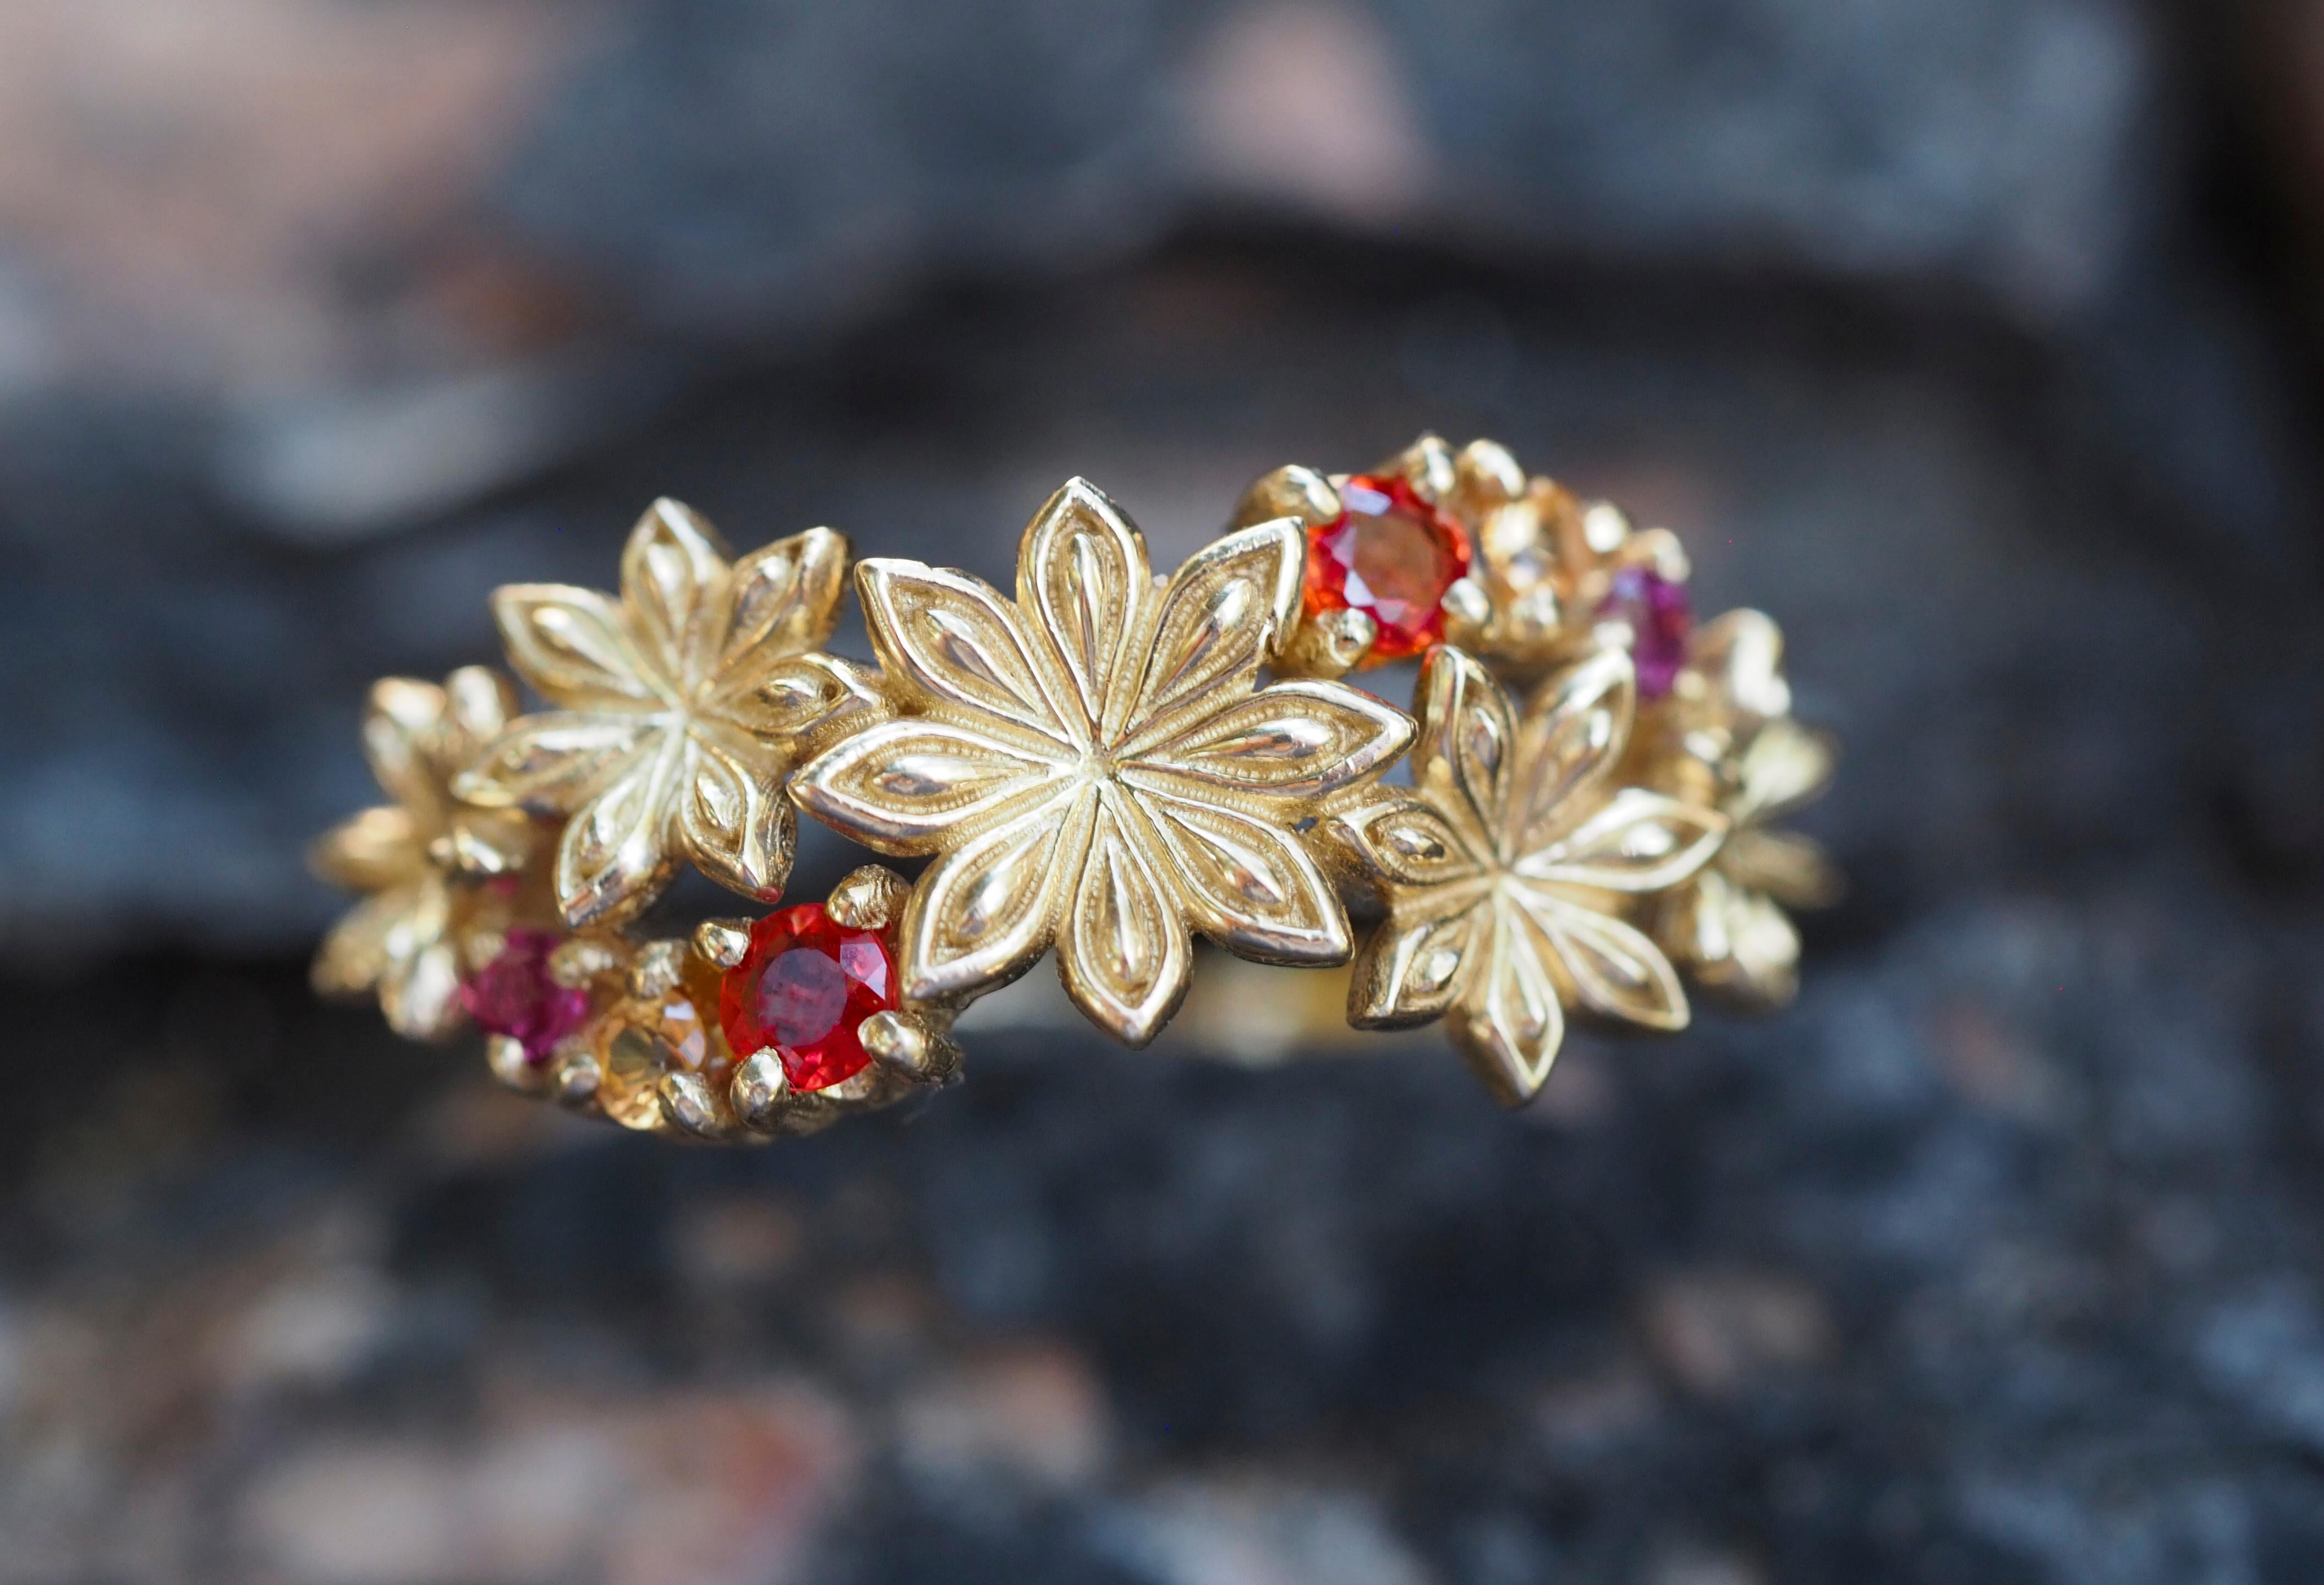 For Sale:  14k Gold Ring with Sapphires and Amethysts, Star Anise Flower Gold Ring. 10